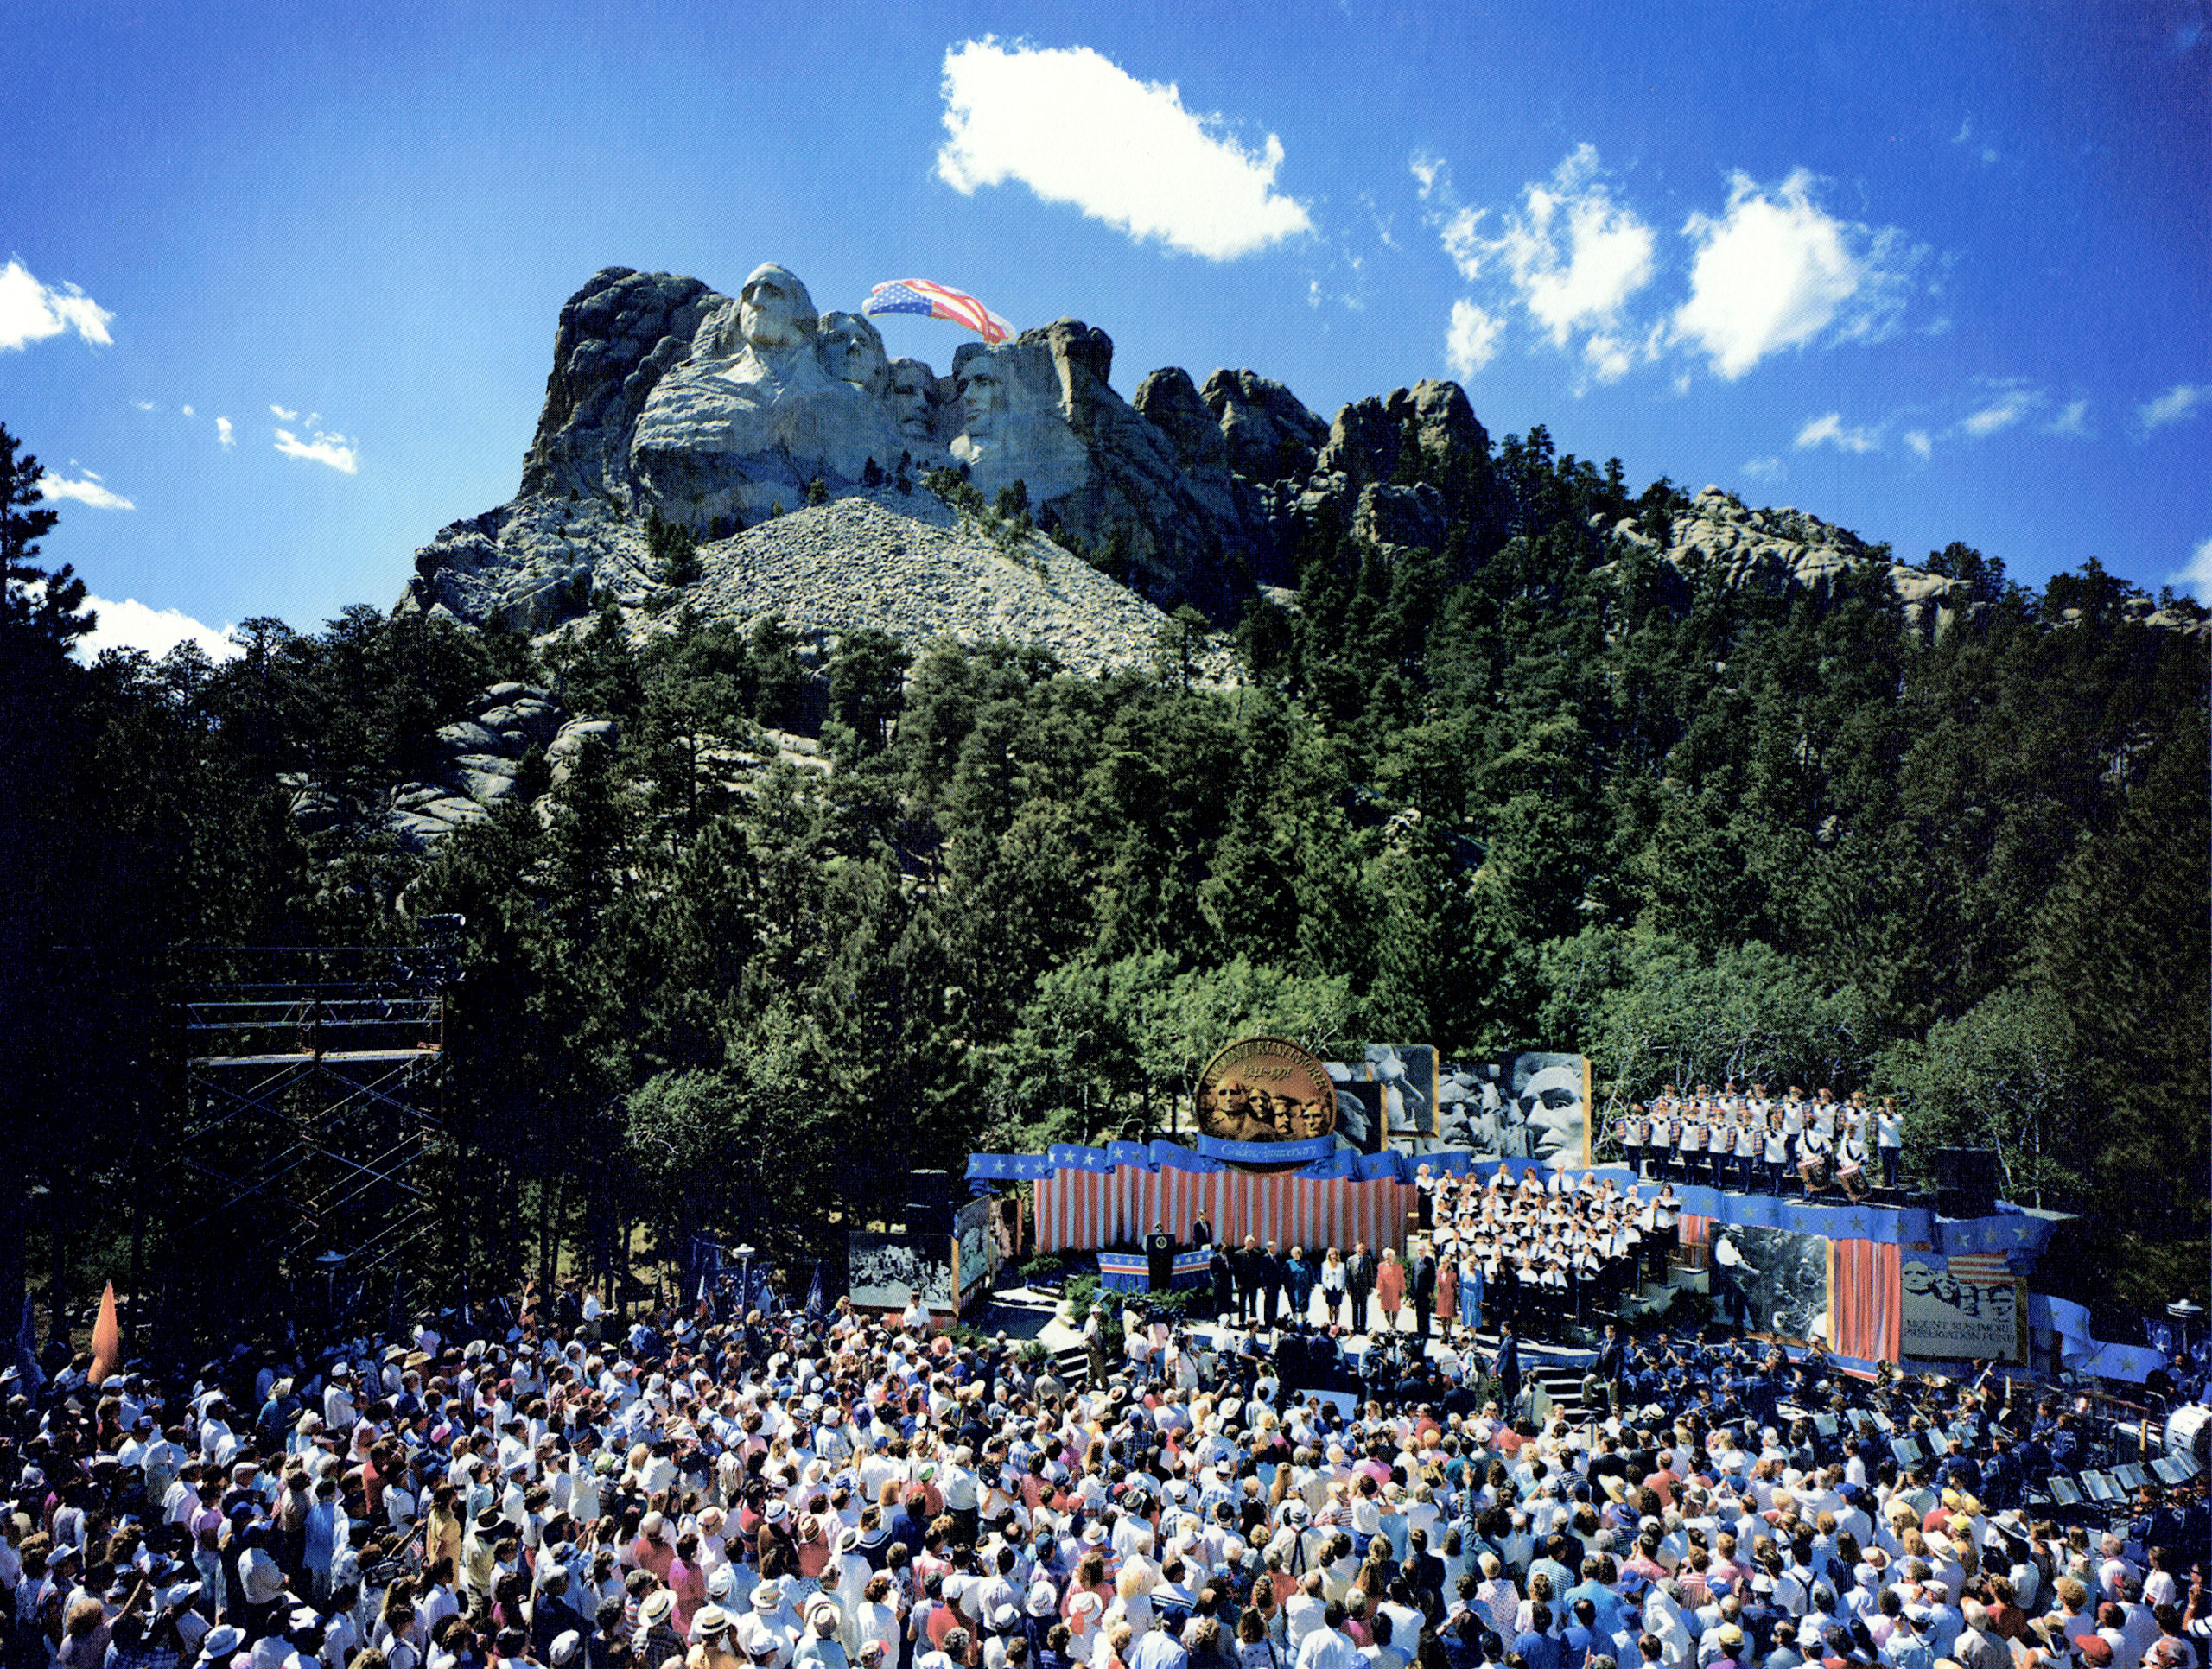 The Golden Anniversary Celebration and Formal Dedication on July 3, 1991, attended by President George Bush and the First Lady, South Dakota Gov. George Mickelson, and Tom Brokaw, among others.